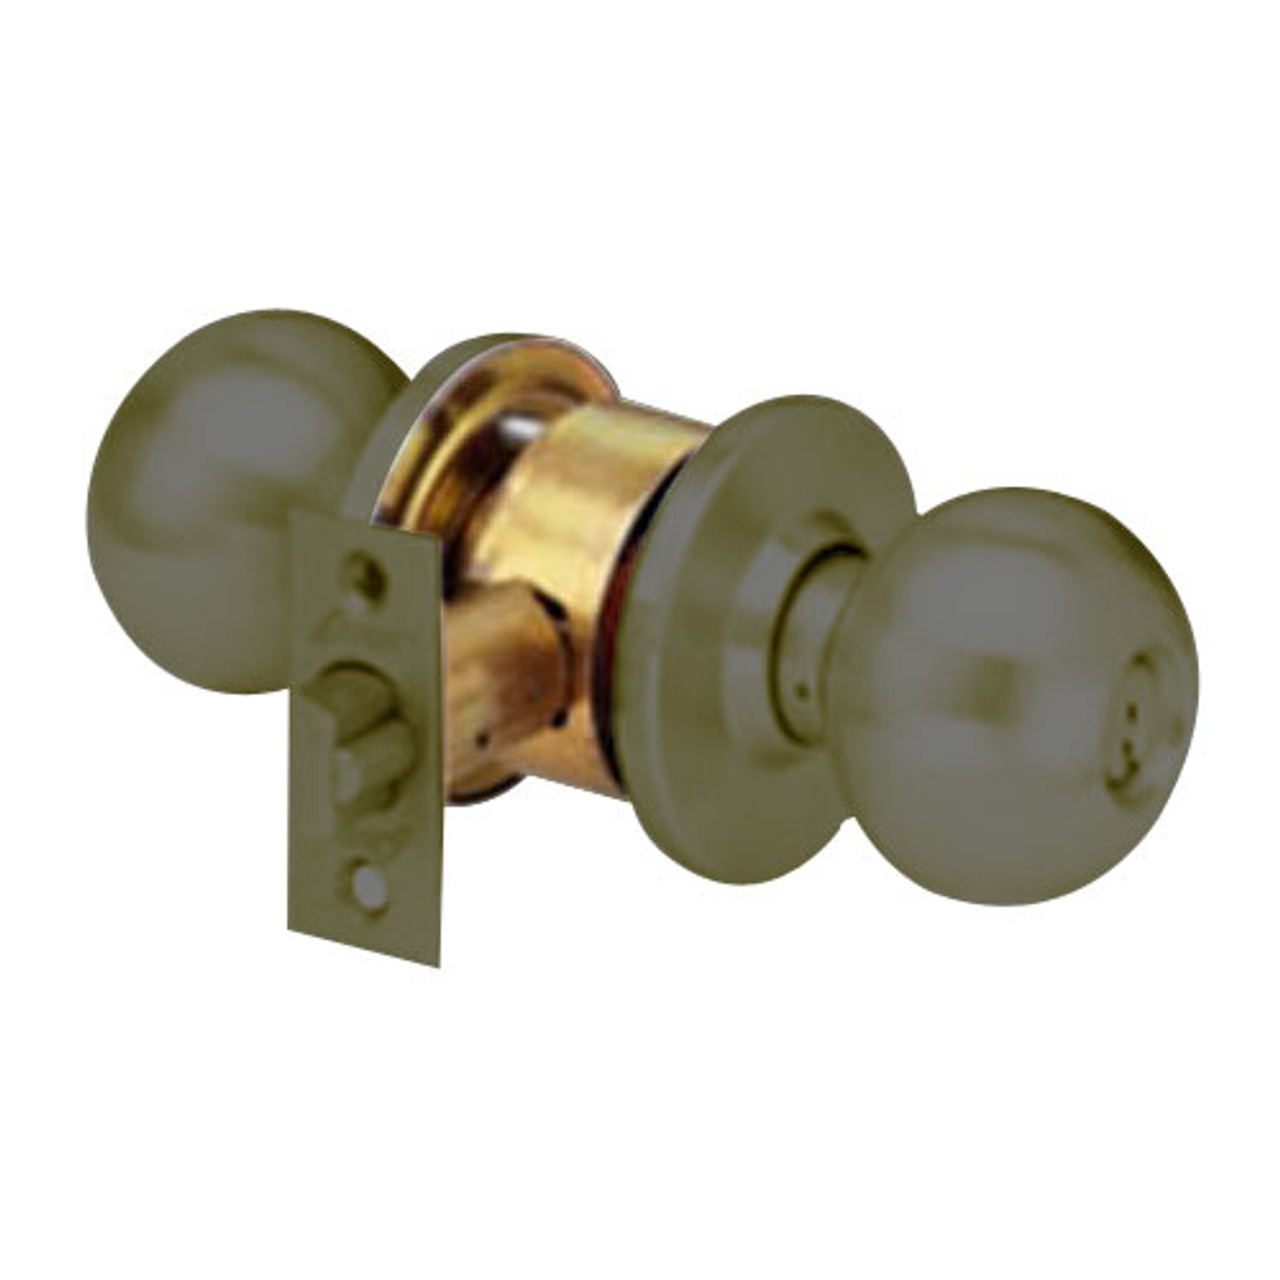 MK14-BD-10B Arrow Lock MK Series Cylindrical Locksets Single Cylinder for Service Station with BD Knob in Oil Rubbed Bronze Finish